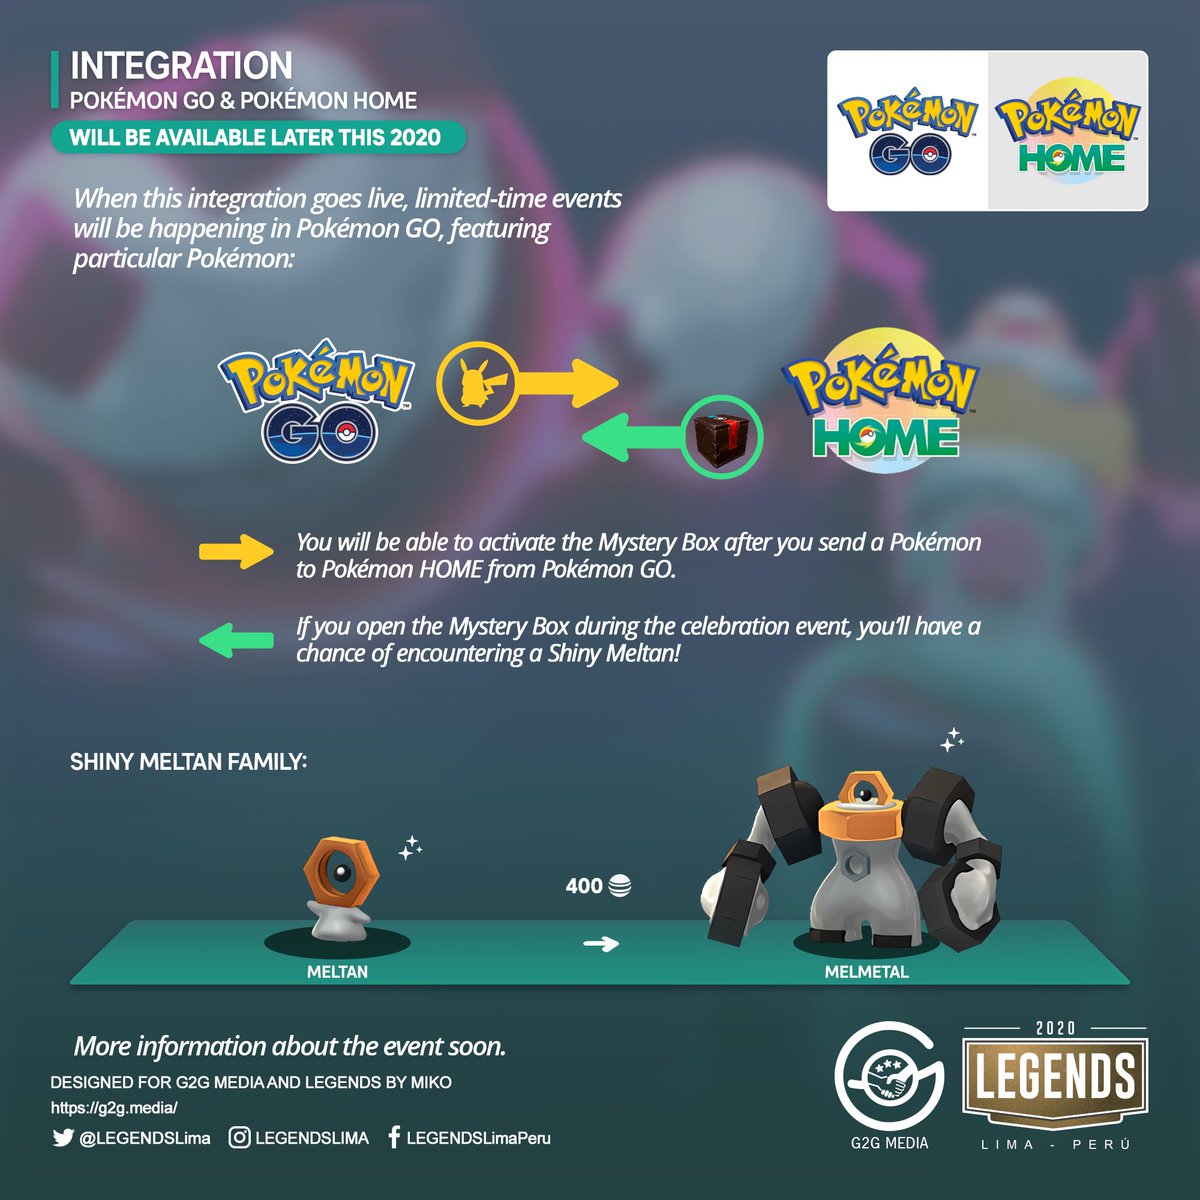 Legends The Release Of The Pokemongo Integration With Pokemonhome Has Been Announced For Release Later This Year Along With An Event Including Meltan Pokemongoapp T Co 5stge3uxoa